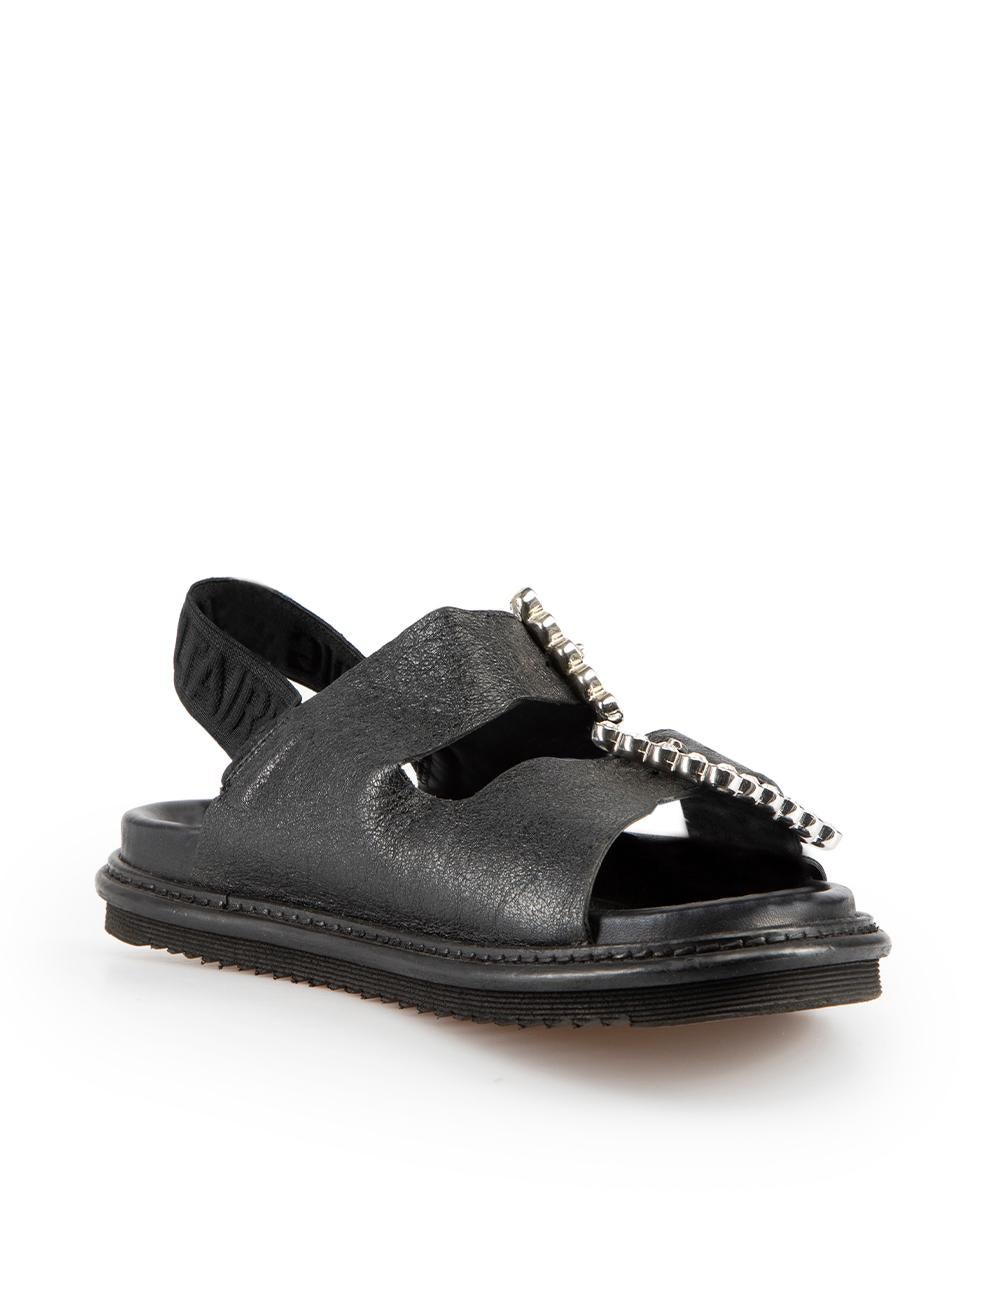 CONDITION is Very good. Minimal wear to shoes is evident. Minimal wear to the foot beds with general creasing of the leather on this used Zadig & Voltaire designer resale item.
 
 Details
 Black
 Leather
 Sandals
 Open toe
 Embellished buckles
